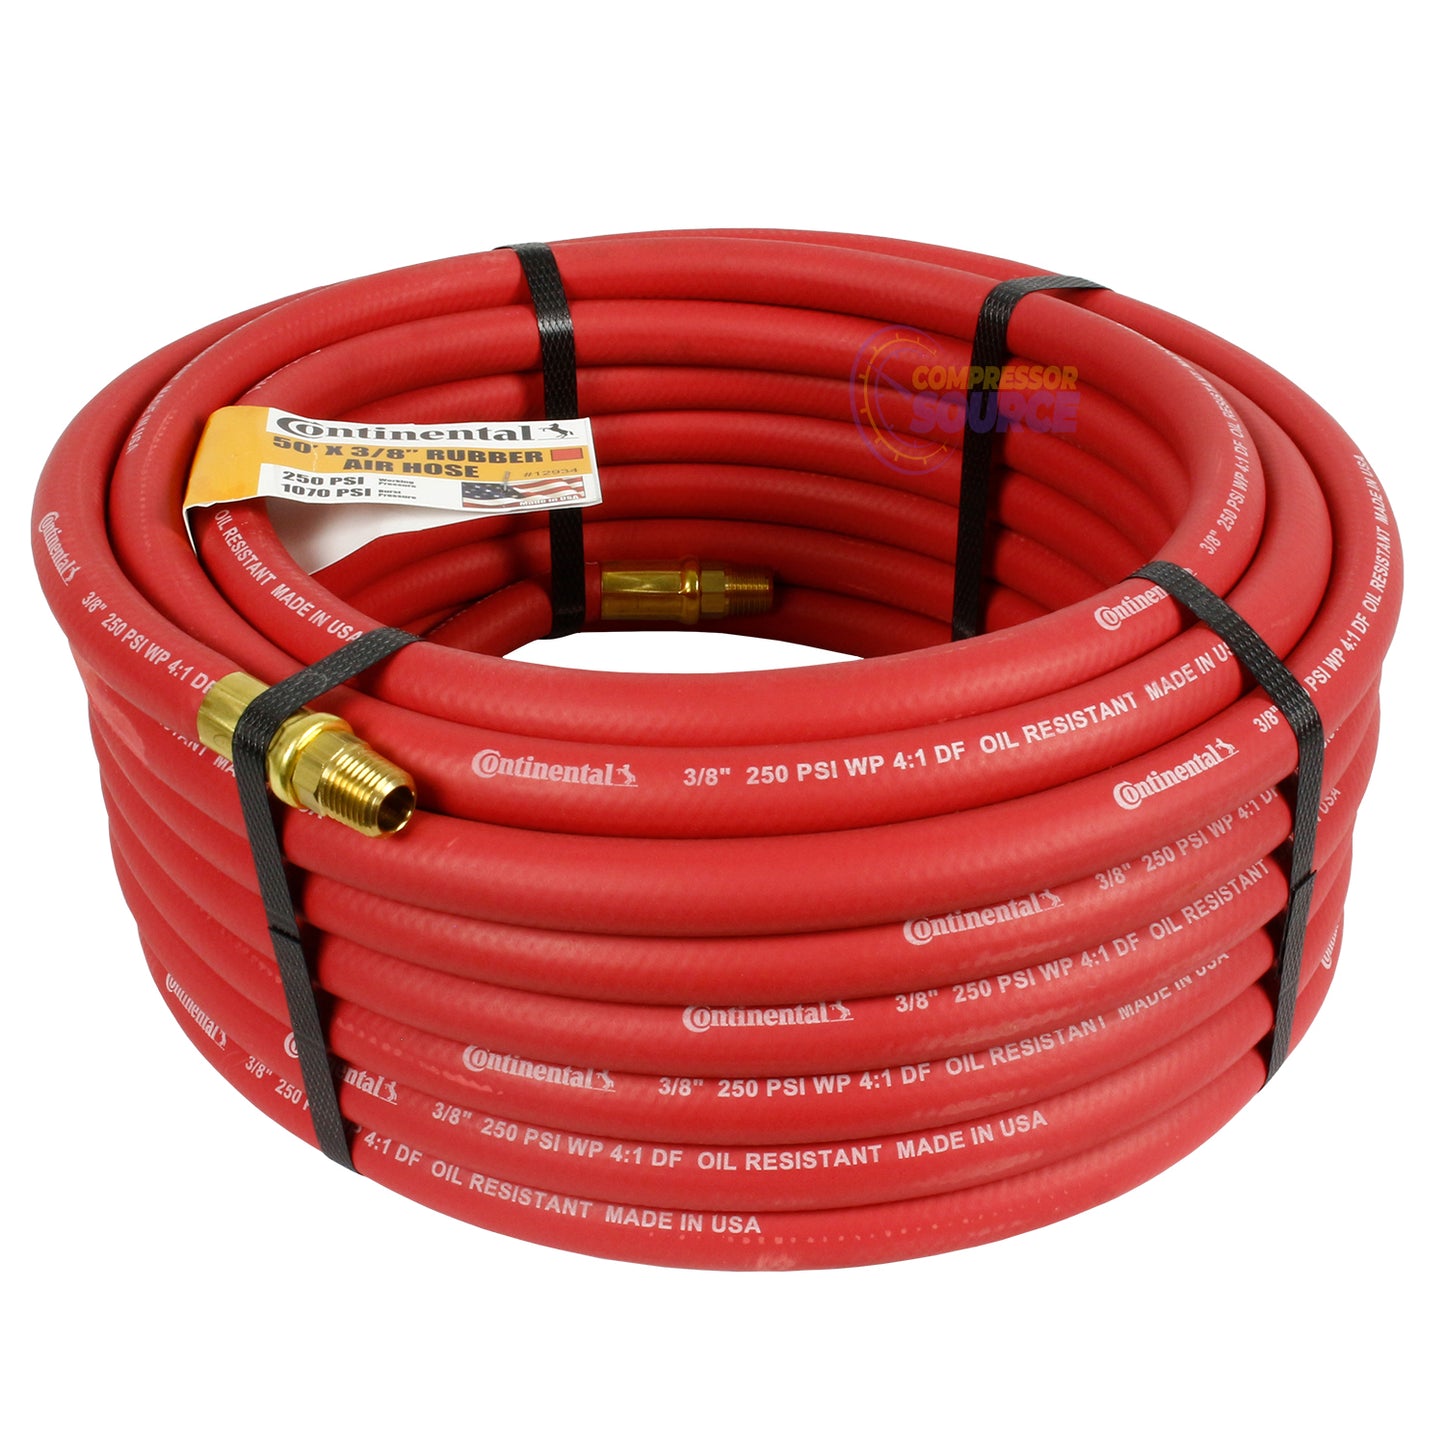 Continental Compressor Air Hose 50ft x 3/8in 250 PSI Oil-Resistant